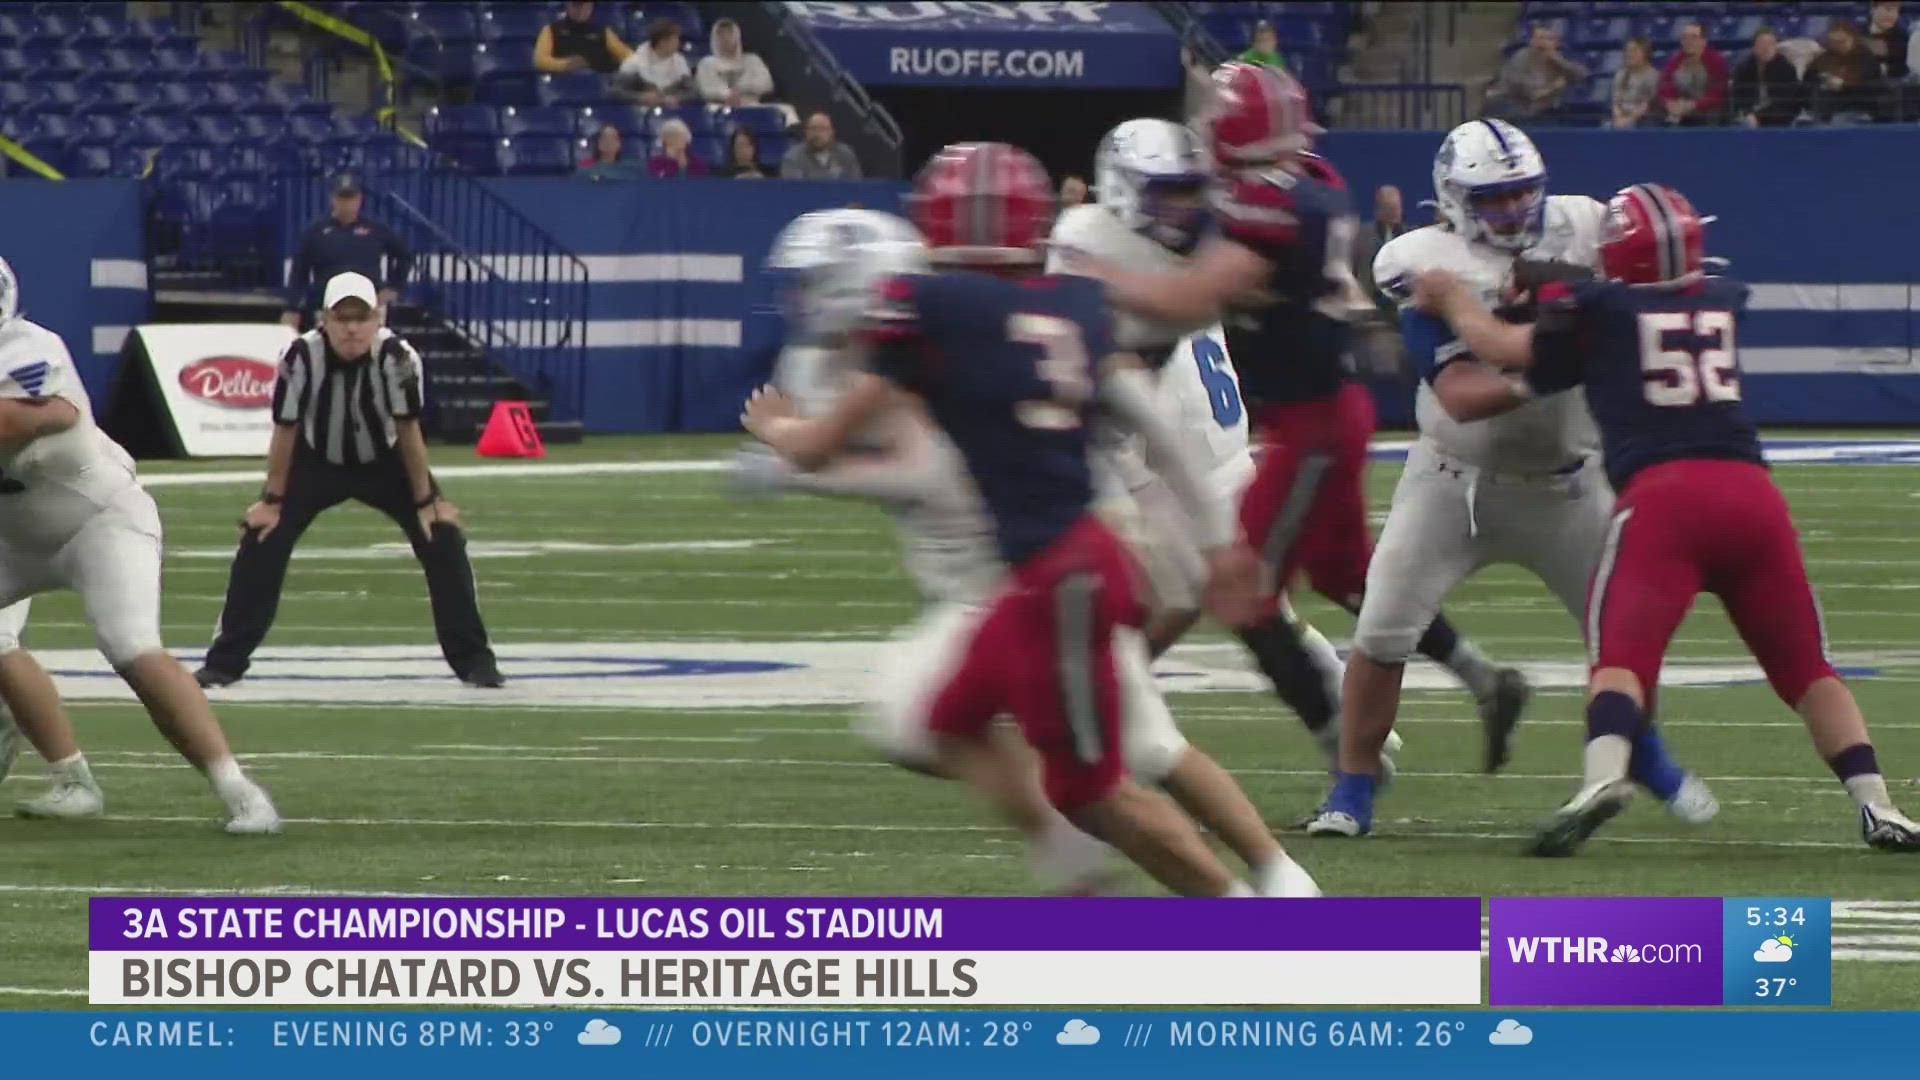 13Sports reporter Dominic Miranda reports from Lucas Oil Stadium where Bishop Chatard beat Heritage Hills 35-7 on Friday.